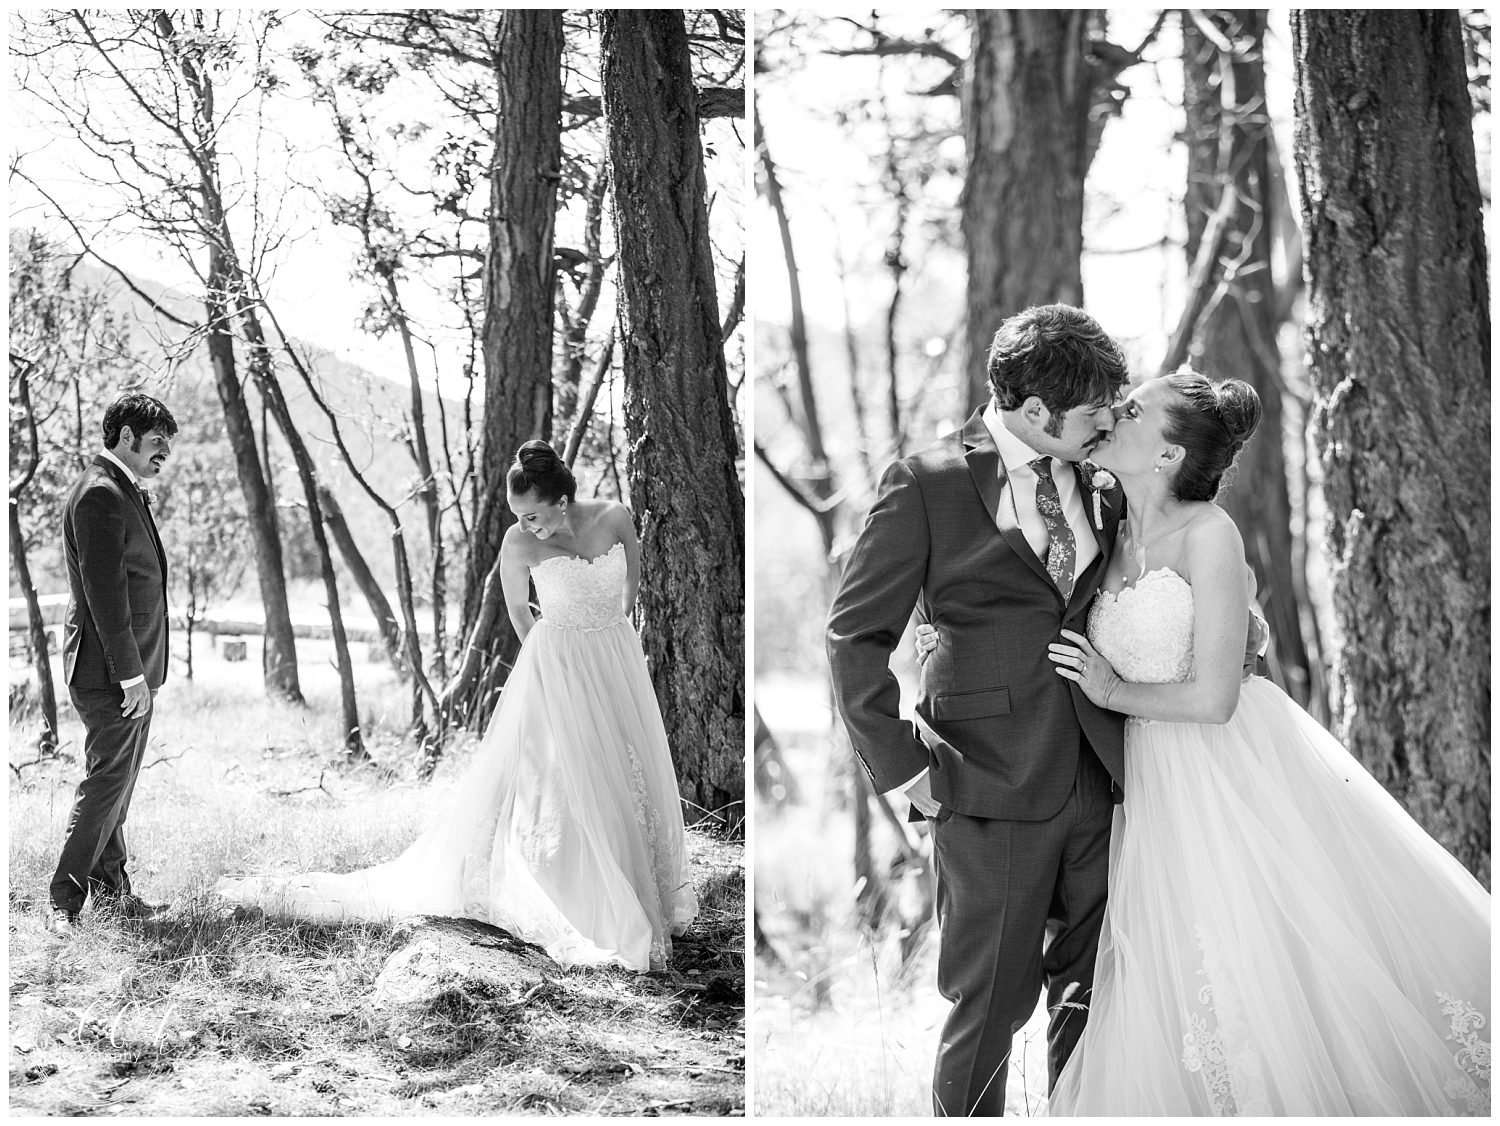 dreamy black and white bride and groom portraits in a forest at Washington Park in Anacortes